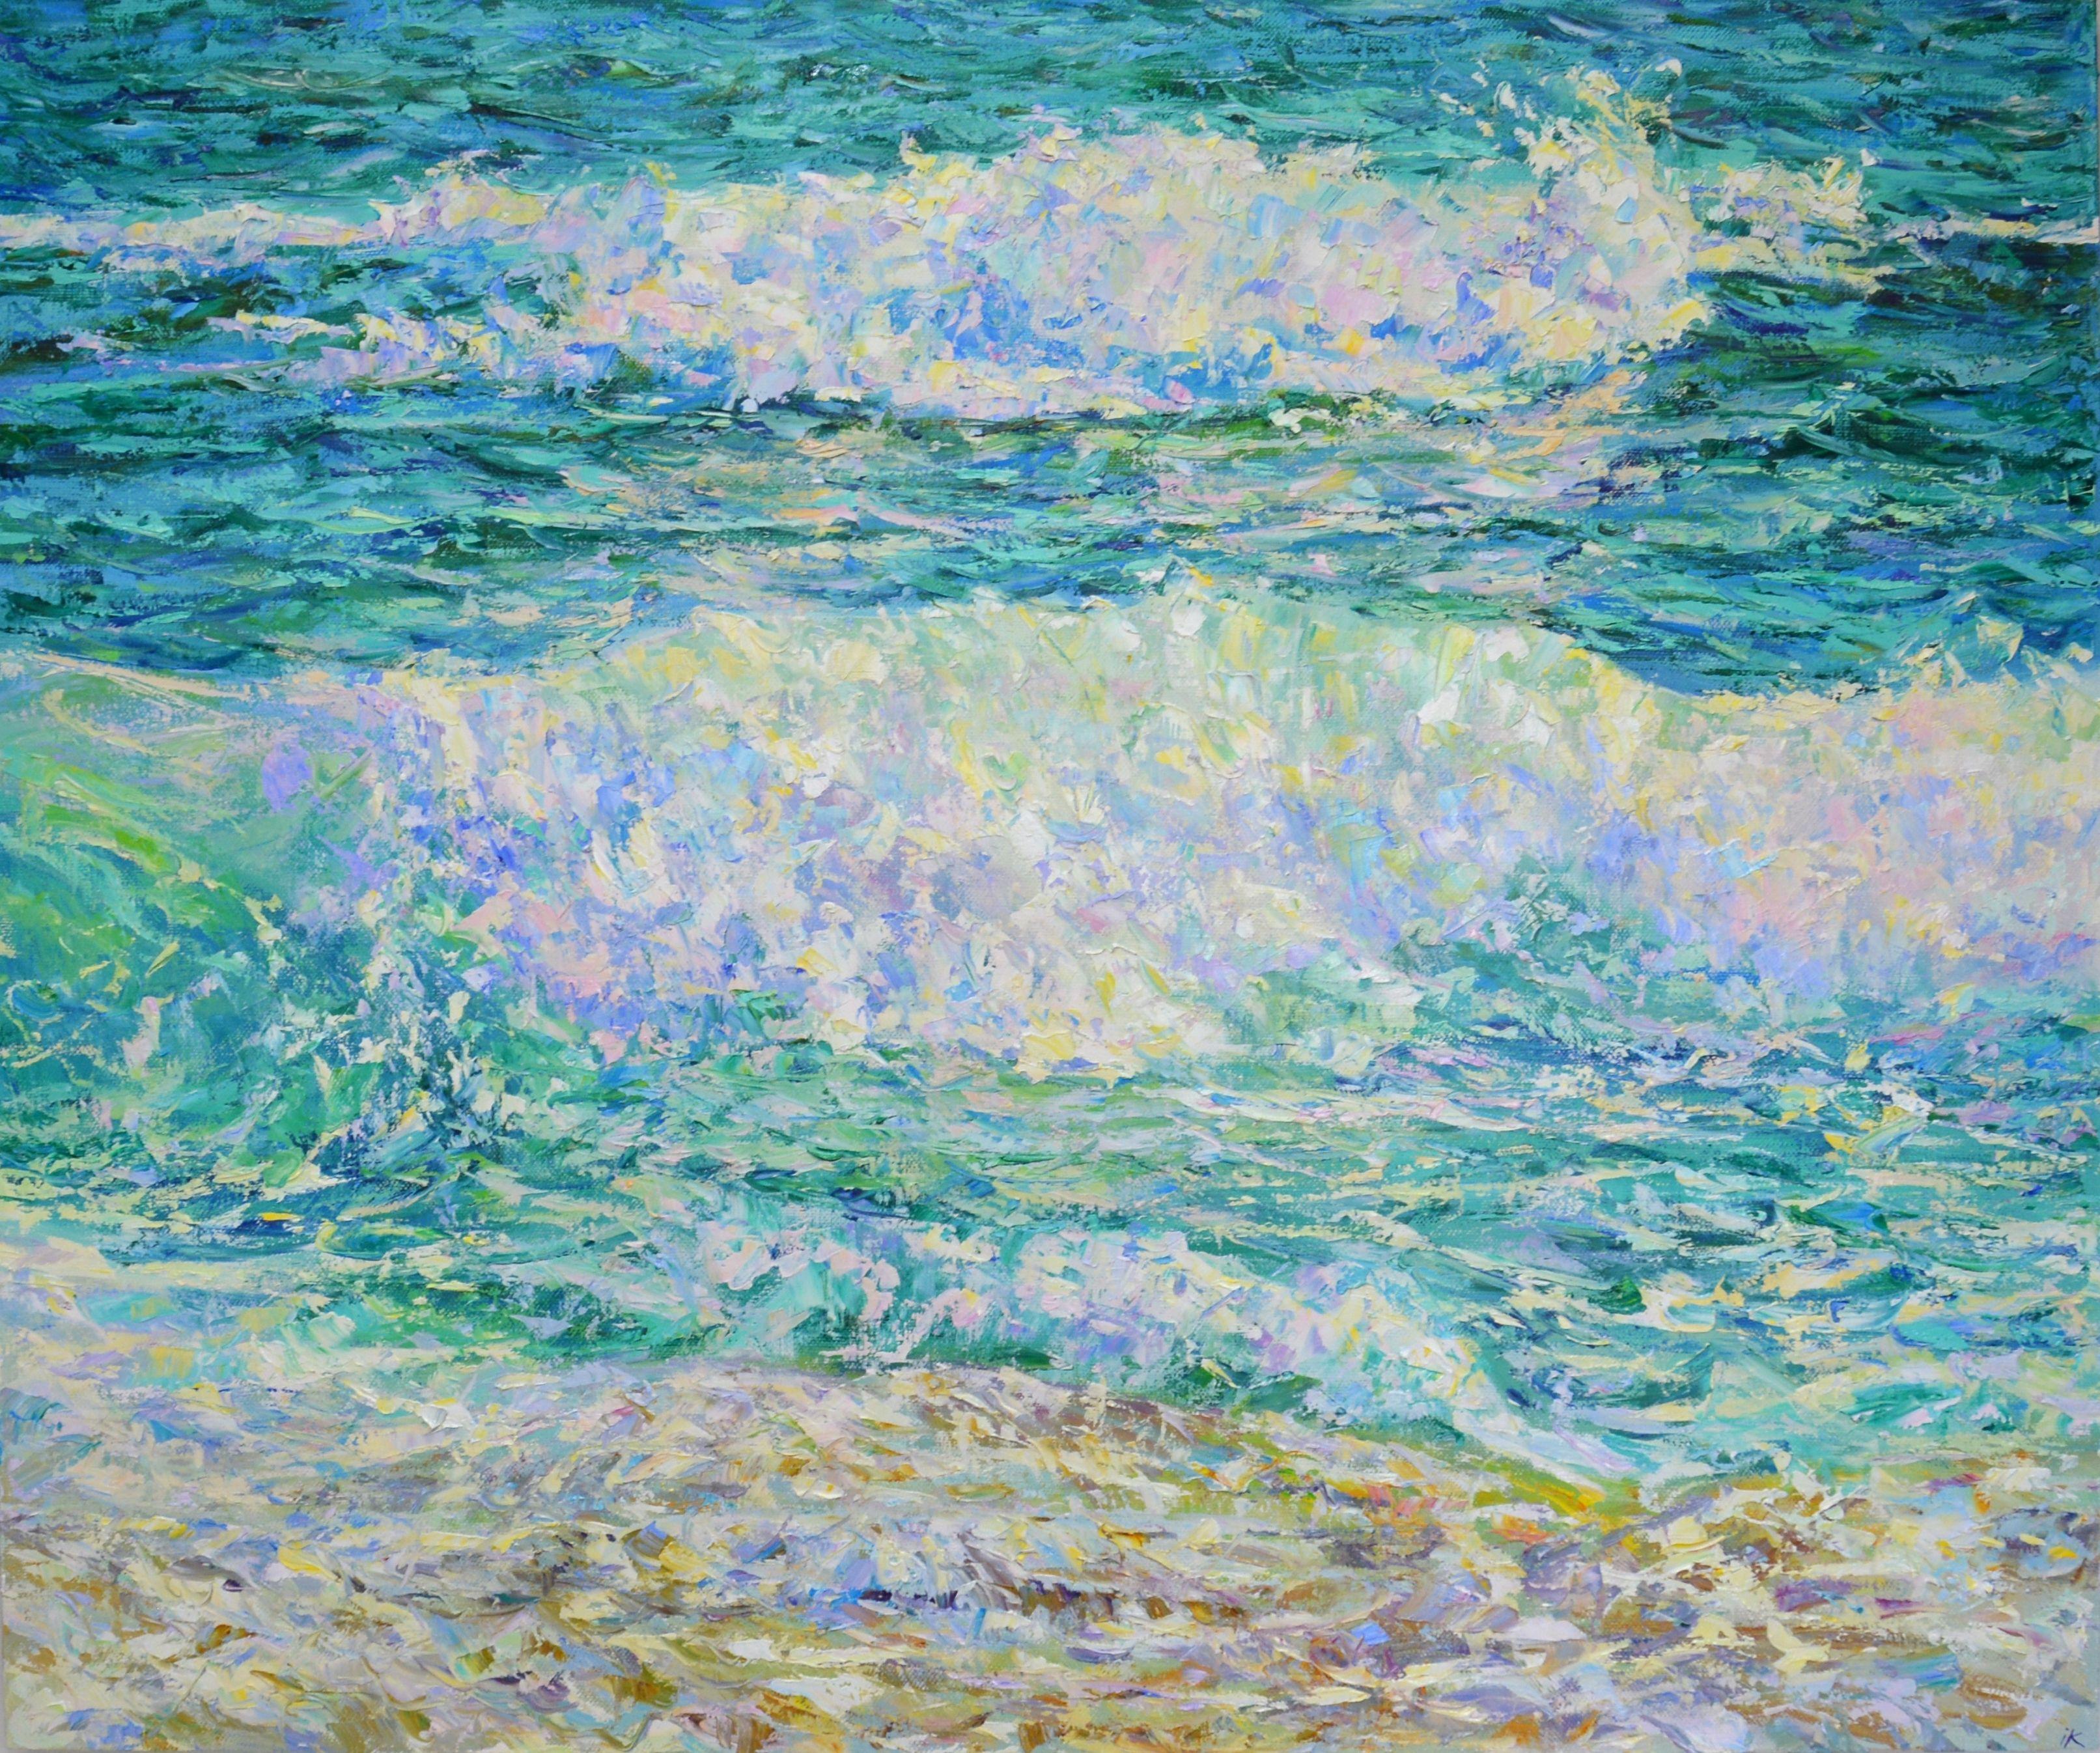 Bright daylight reflects off the rolling waves, creating an almost abstract composition. A rigid palette of knives and a rich palette of turquoise, white, light purple, pink shades emphasize the warm radiance of the sun and the movement of water.